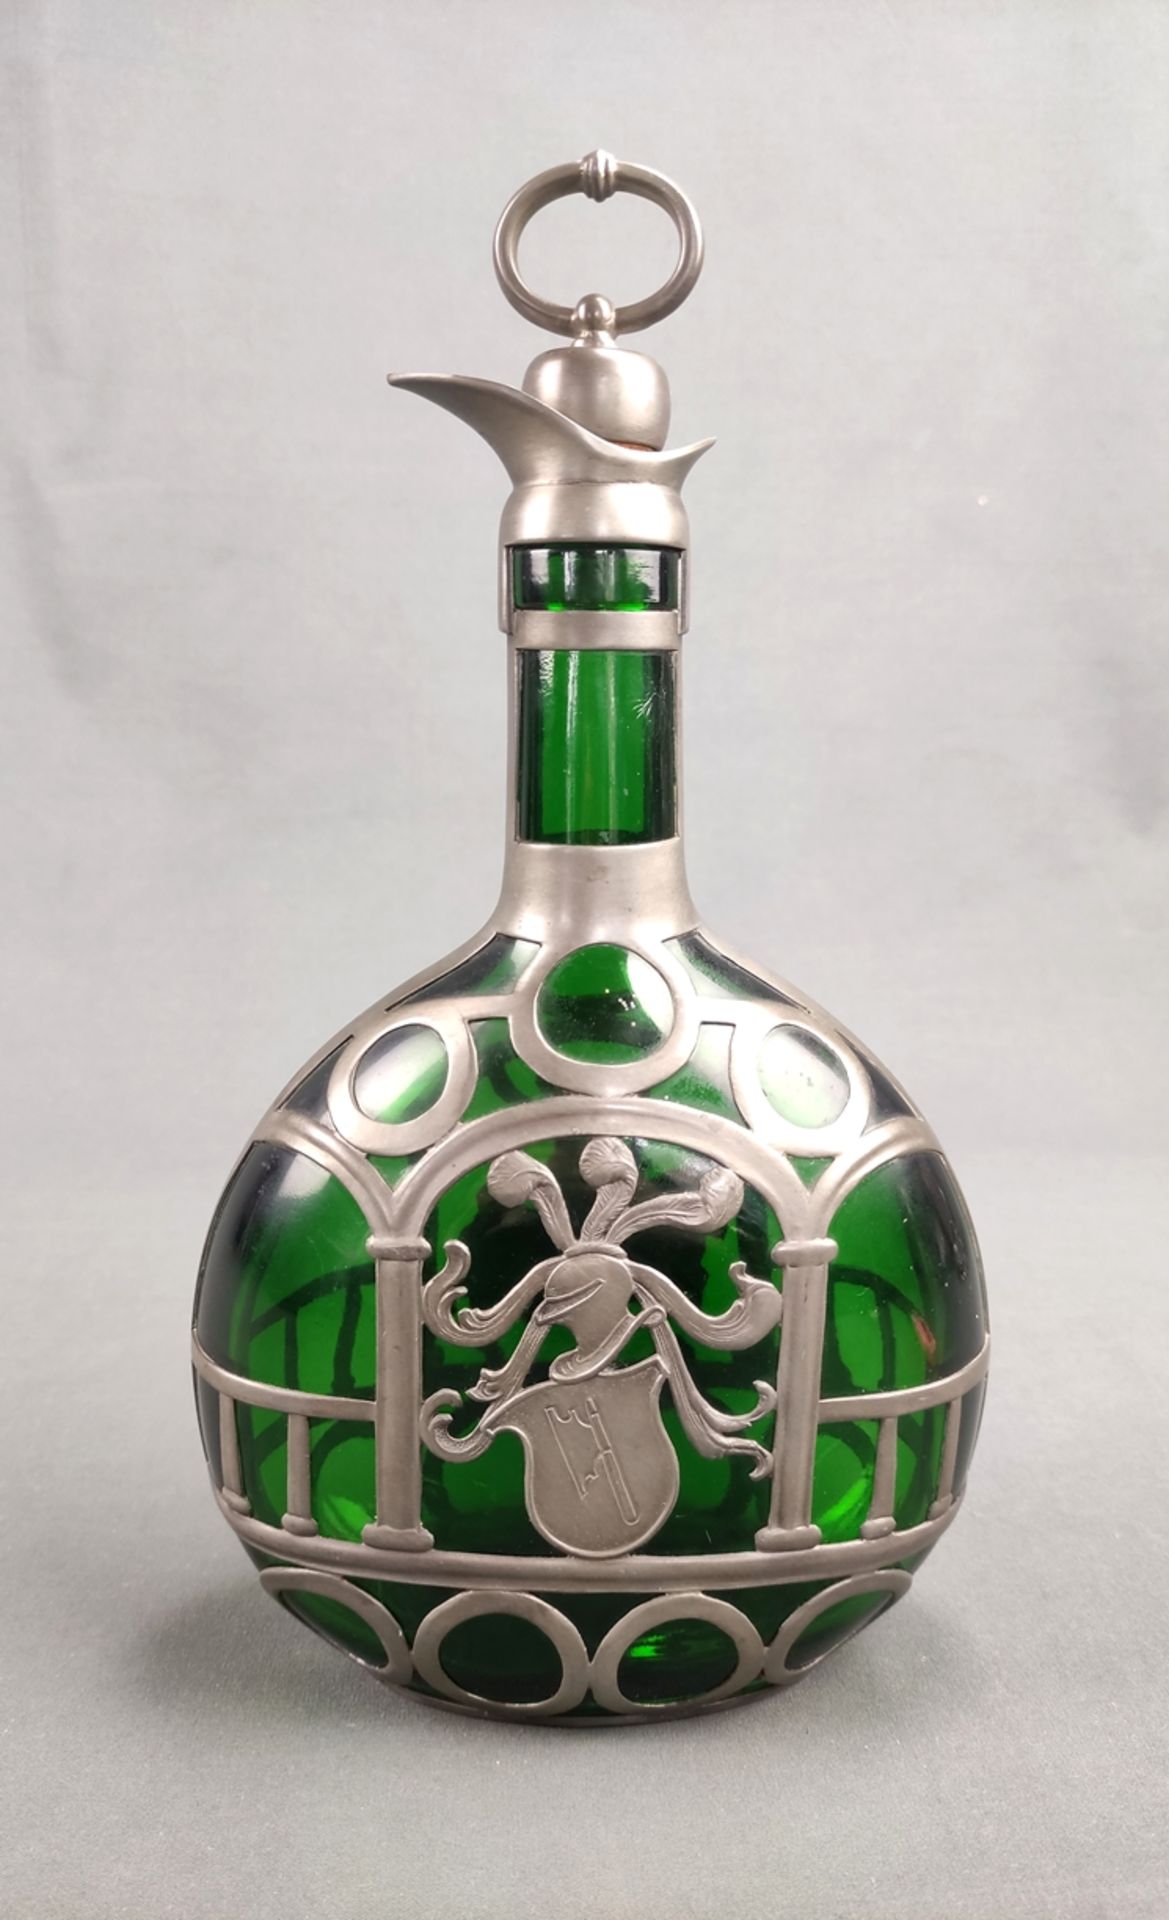 Bottle with decorative pewter frame, green glass, with cork stopper, on one side decorated with kni